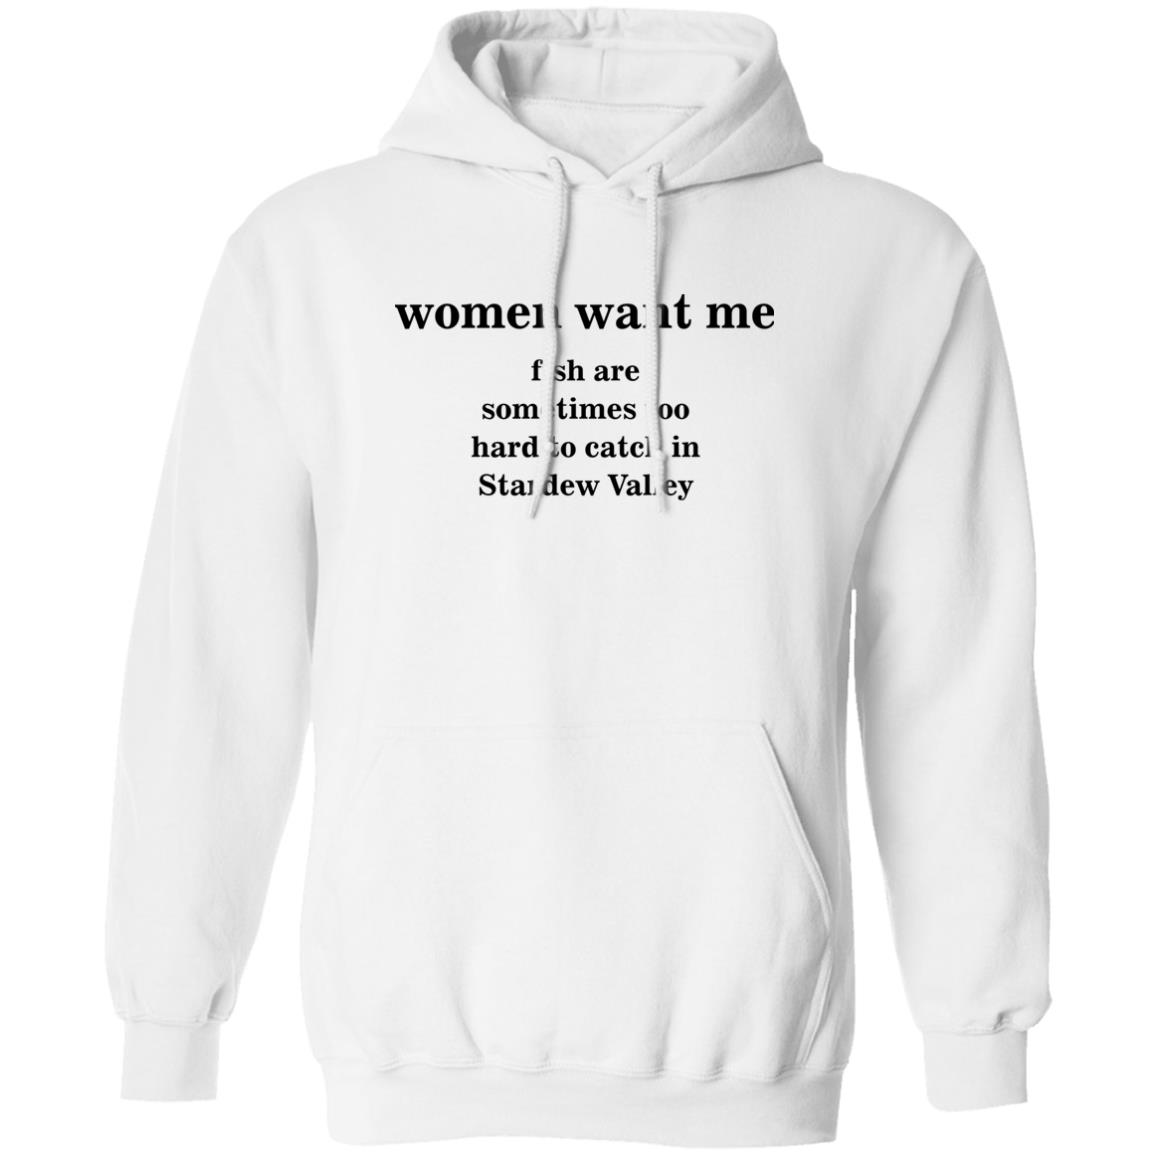 Women Want Me Fish Are Sometimes Too Hard To Catch In Stardew Valley Shirt 2